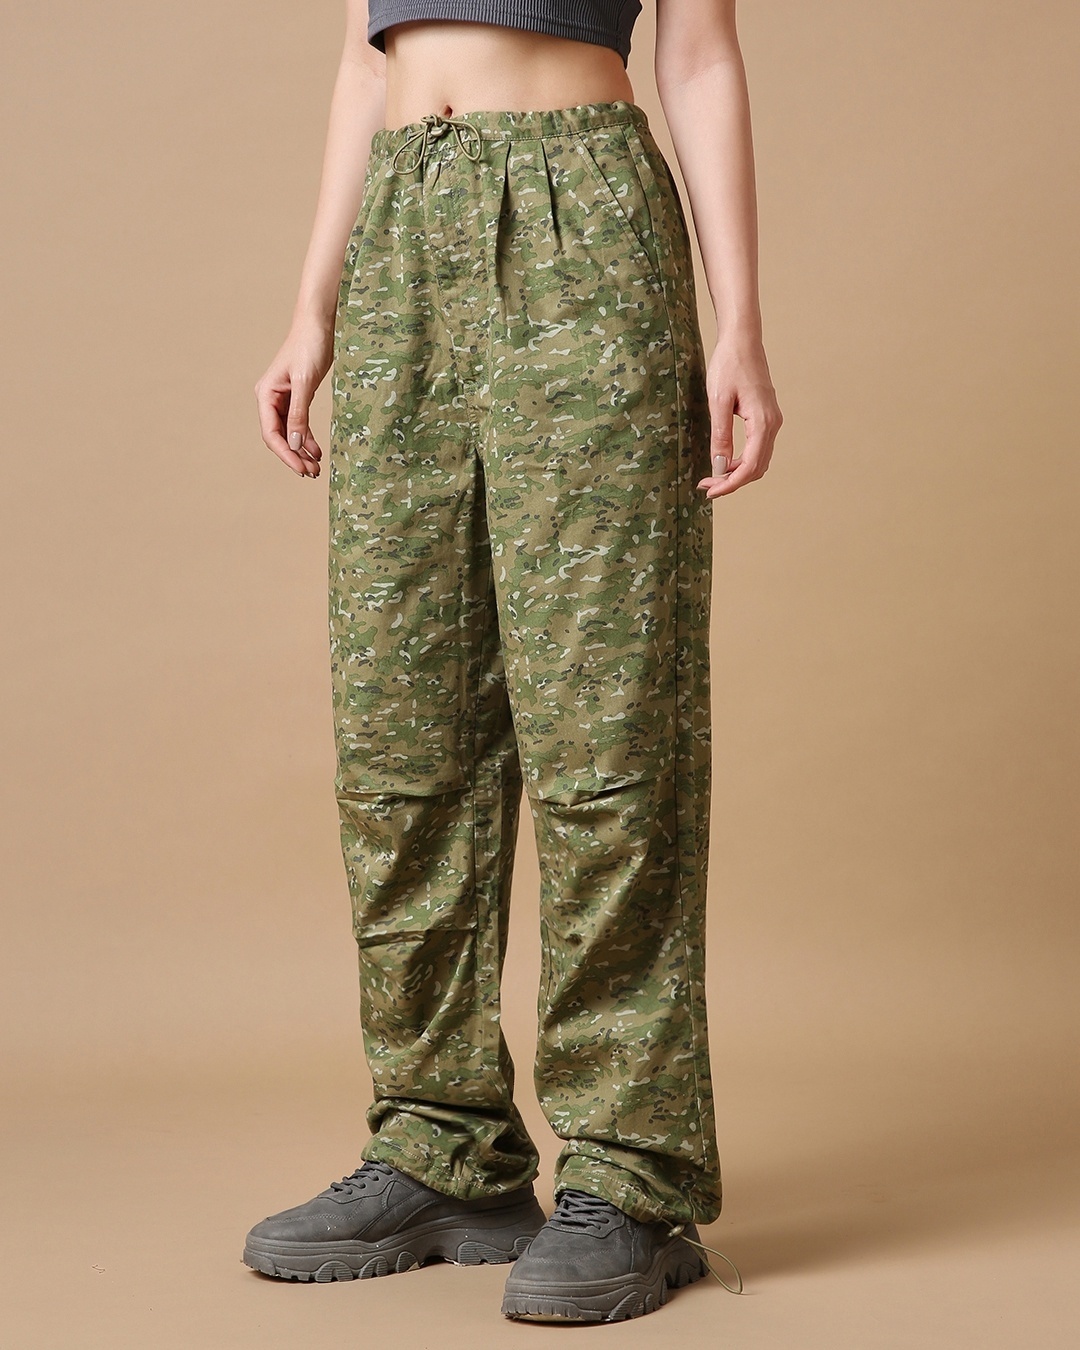 THE DRY STATE Women's Camouflage Green Trousers & Pants